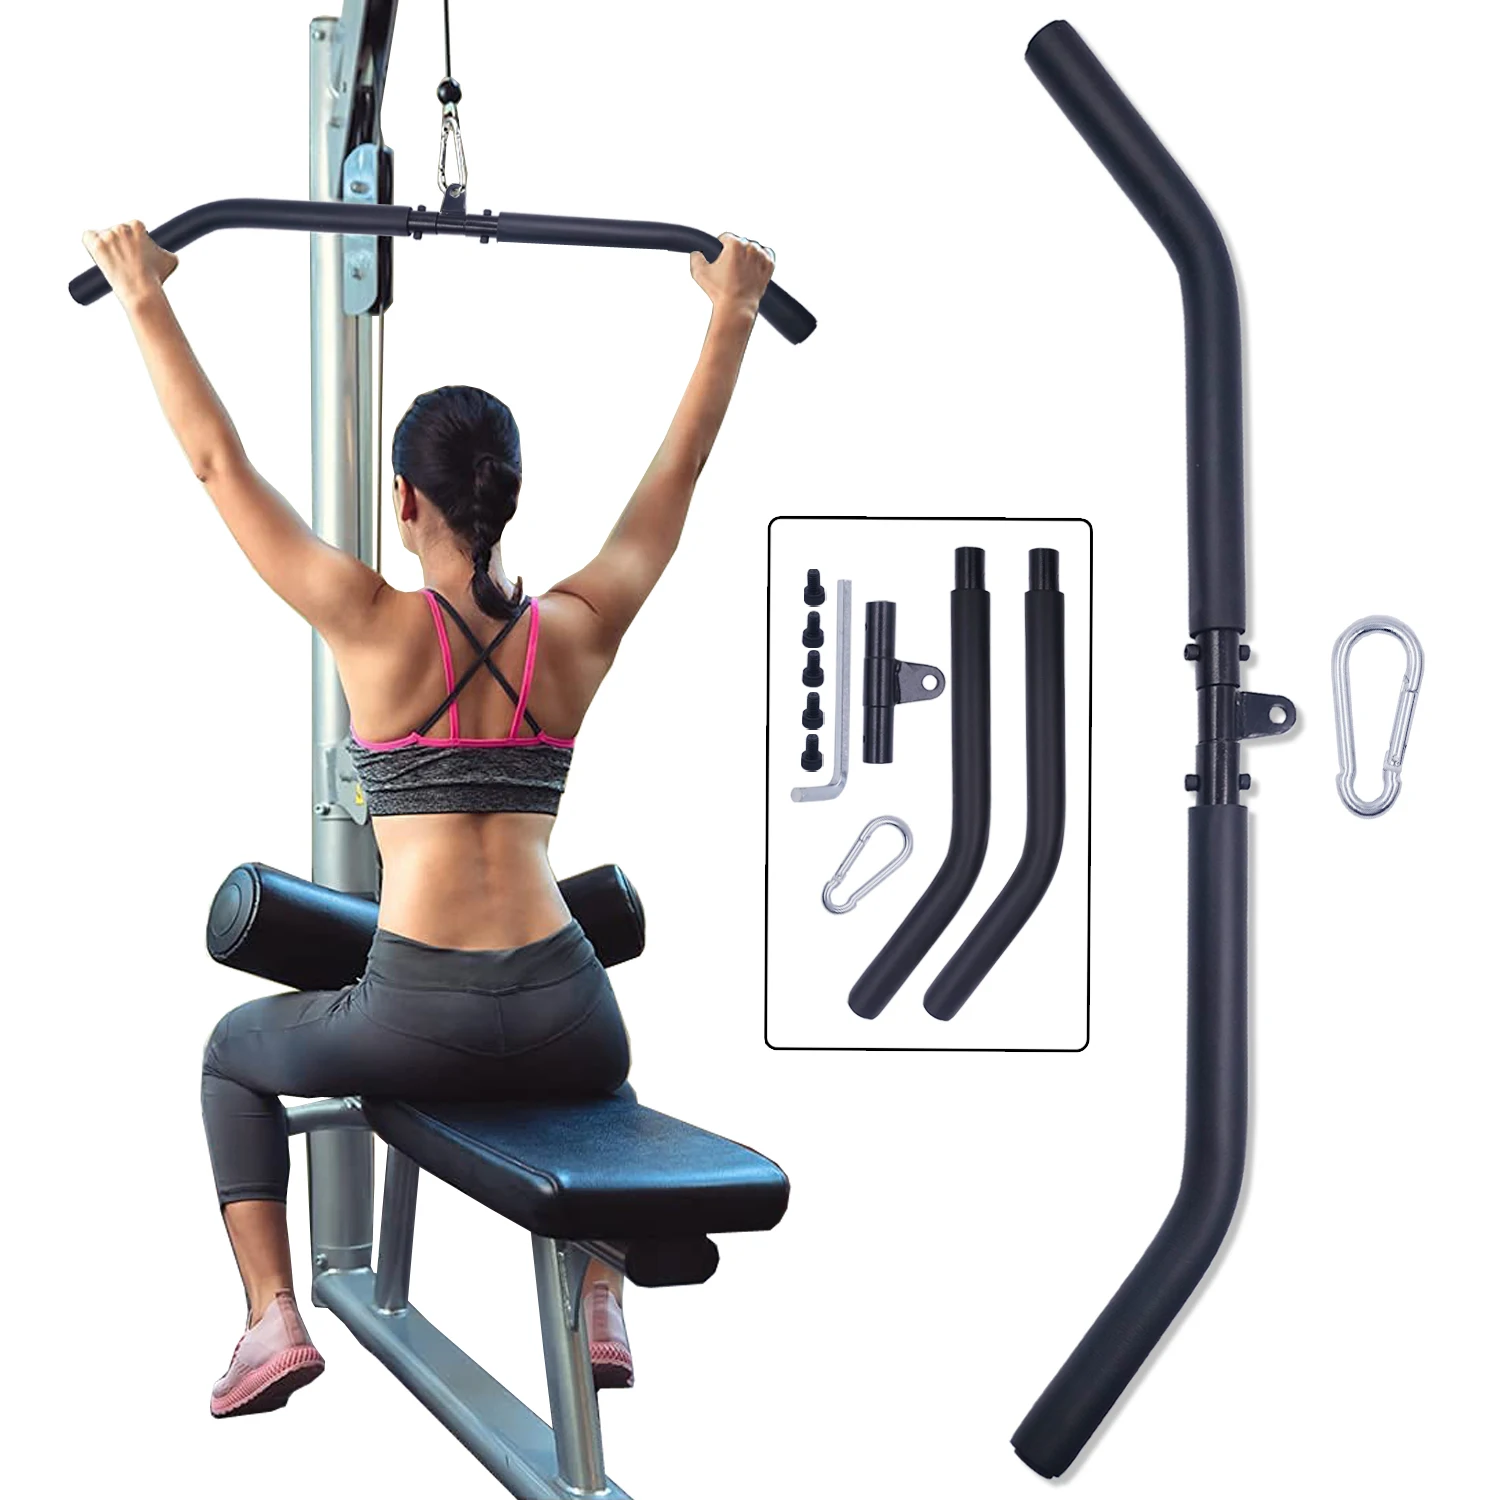 Exercise & Fitness Olympic Strength Heavy Duty ABS Metal With Adjustable Neoprene Straps- Strength Training Recommended To Increase Upper Body Strength Pull Ups Suspension Training Shihan World Gym Fitness Olympic Gymnastic Rings Body Building 